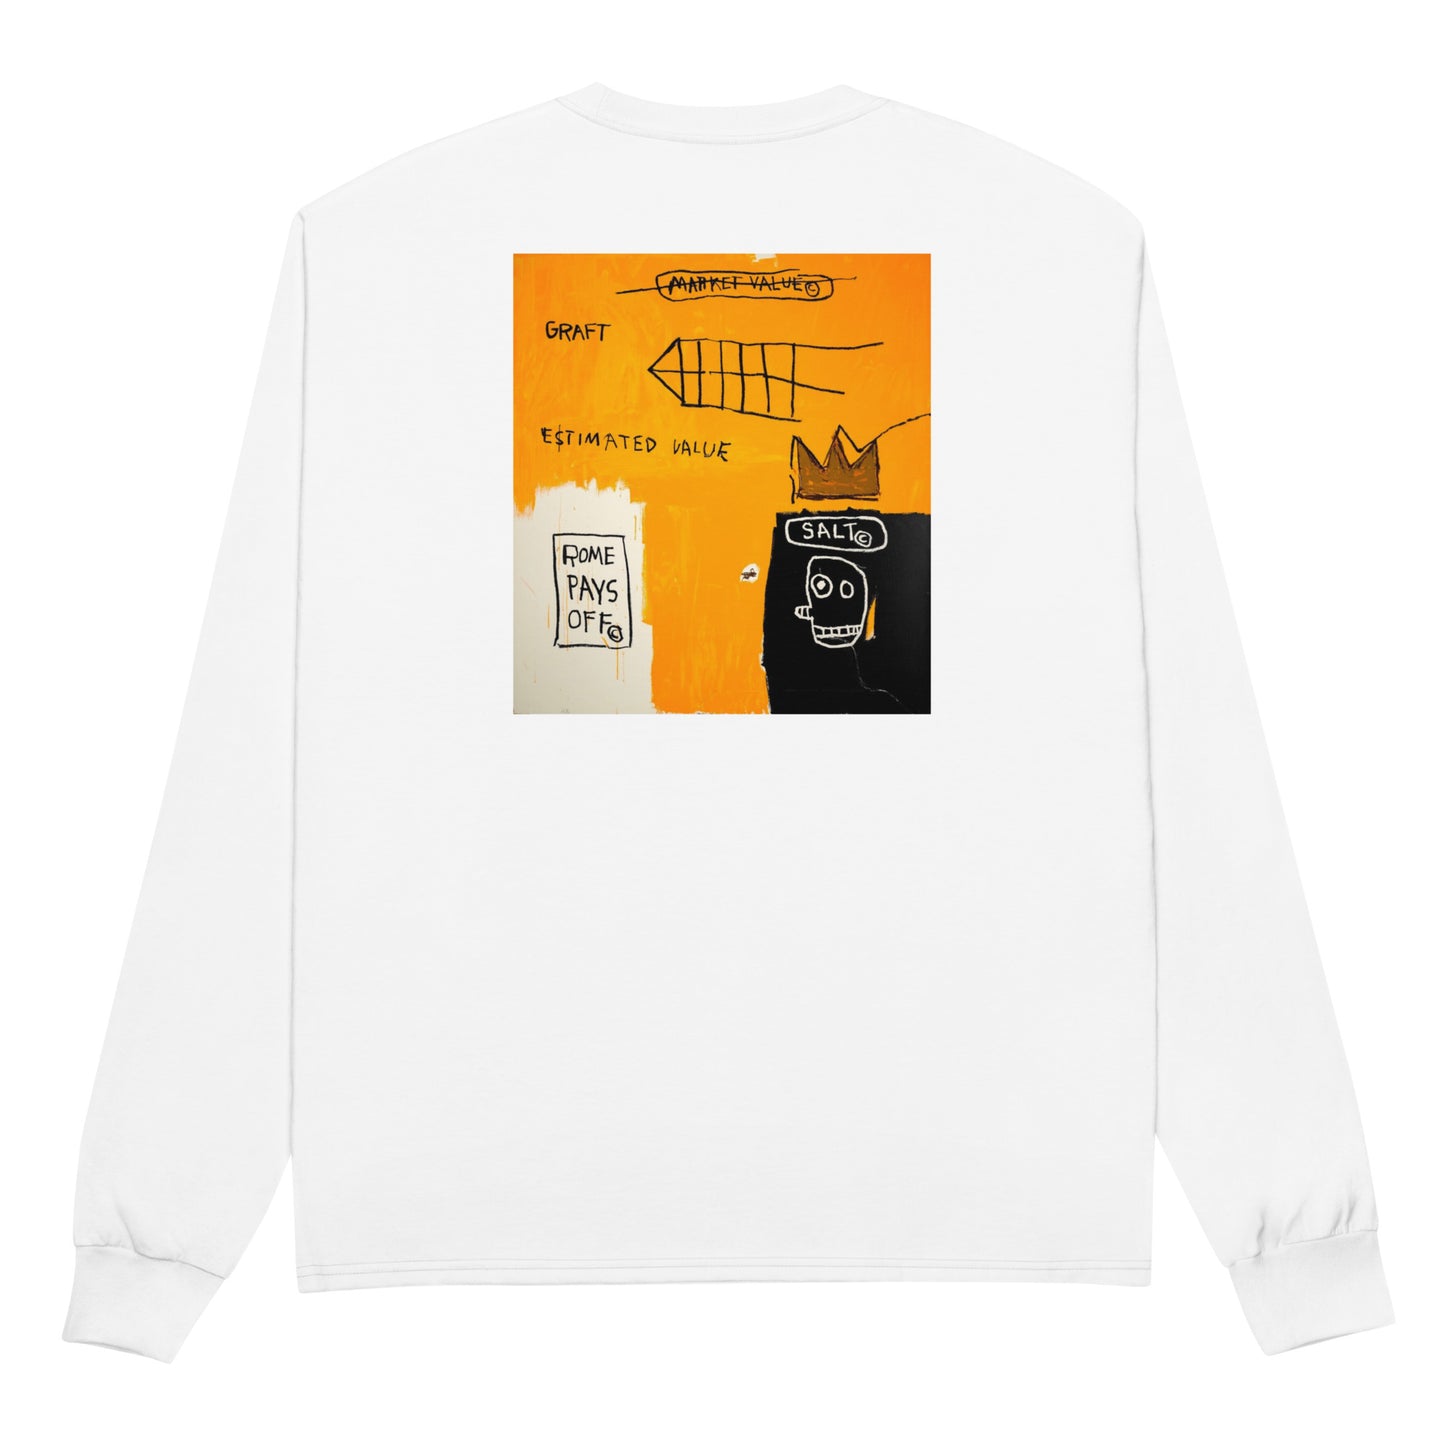 Jean-Michel Basquiat "Rome Pays Off" Artwork Embroidered + Printed Premium Champion Streetwear Long Sleeve Shirt White